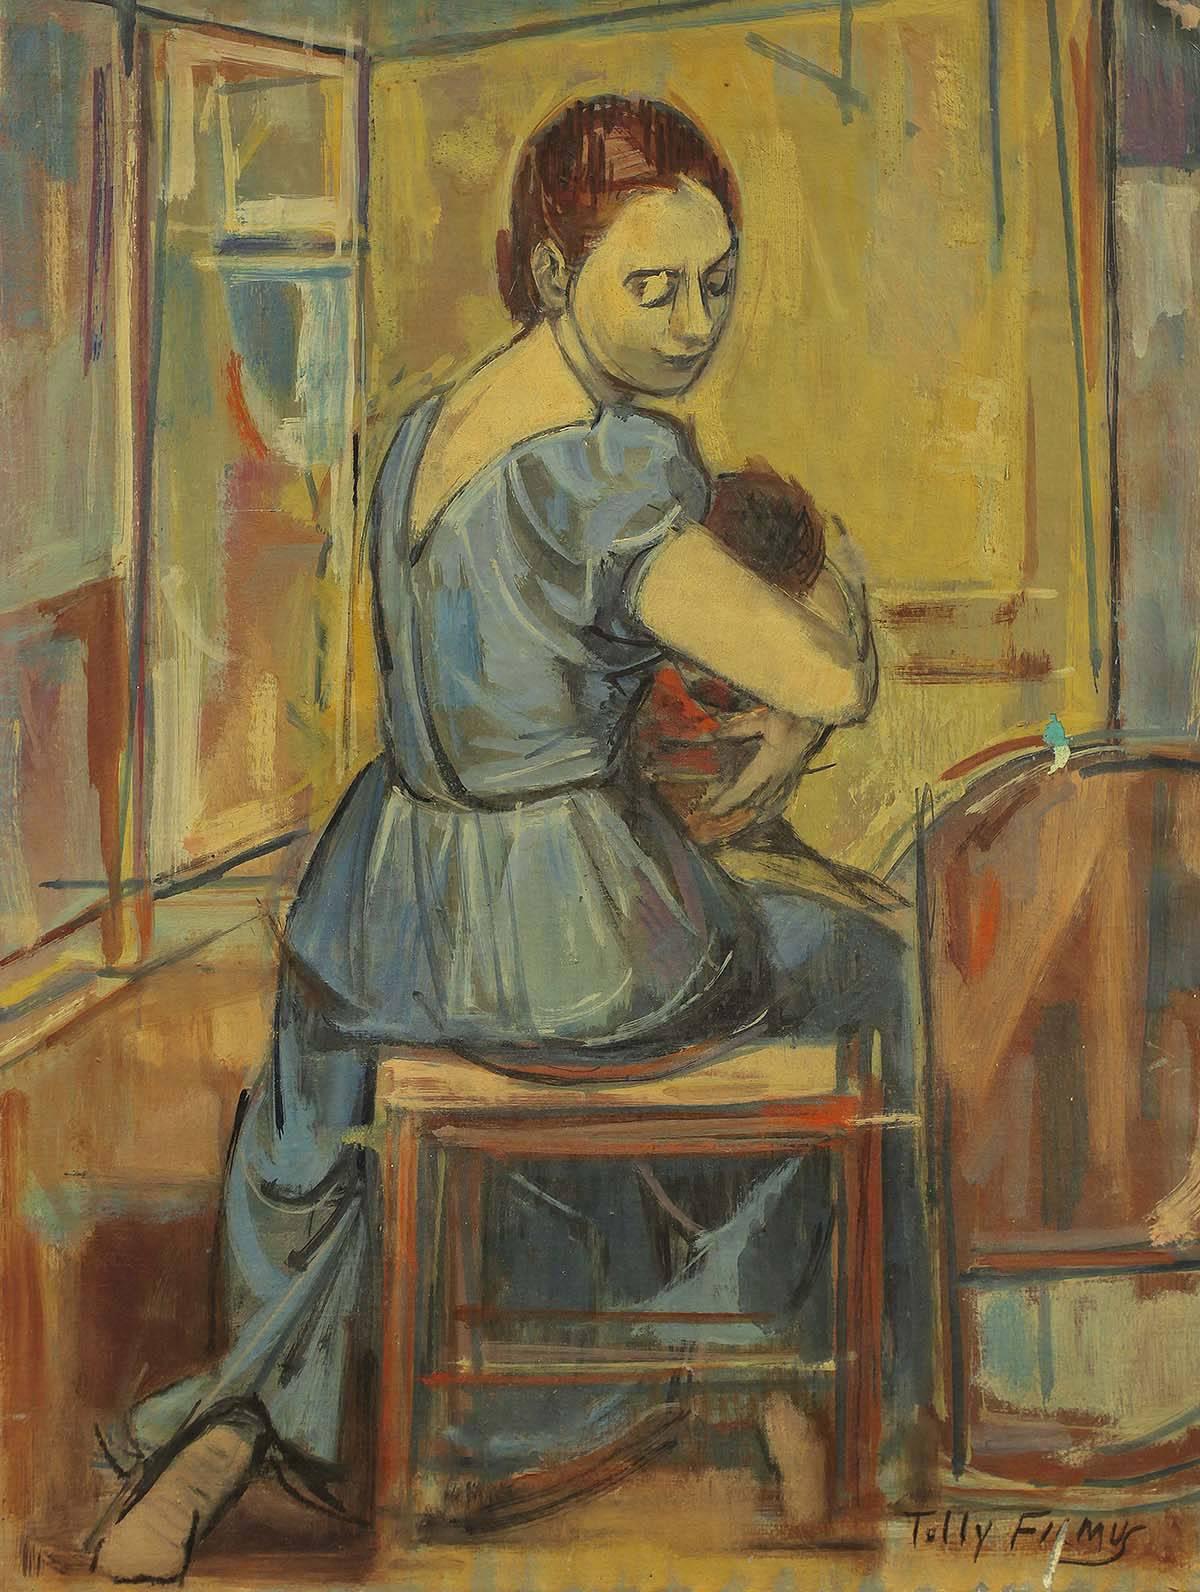 Mother and Child - Painting by Tully Filmus